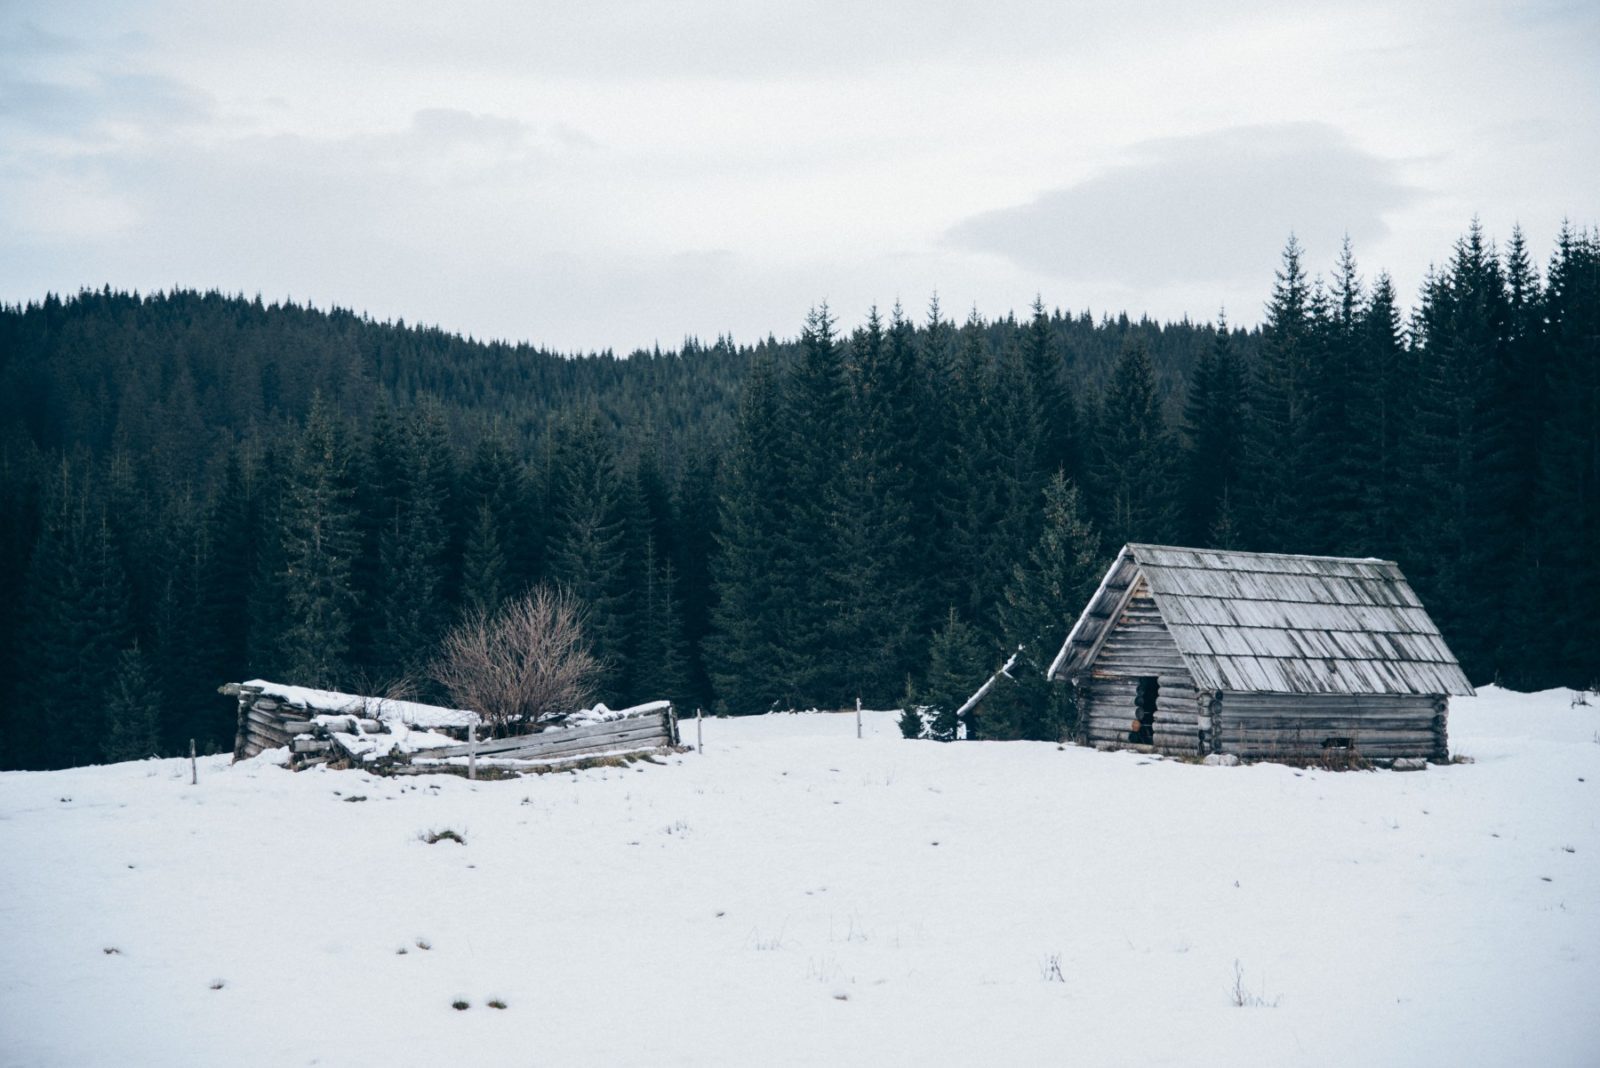 How to End SAD, Seasonal Affective Disorder, and Start Loving Winter